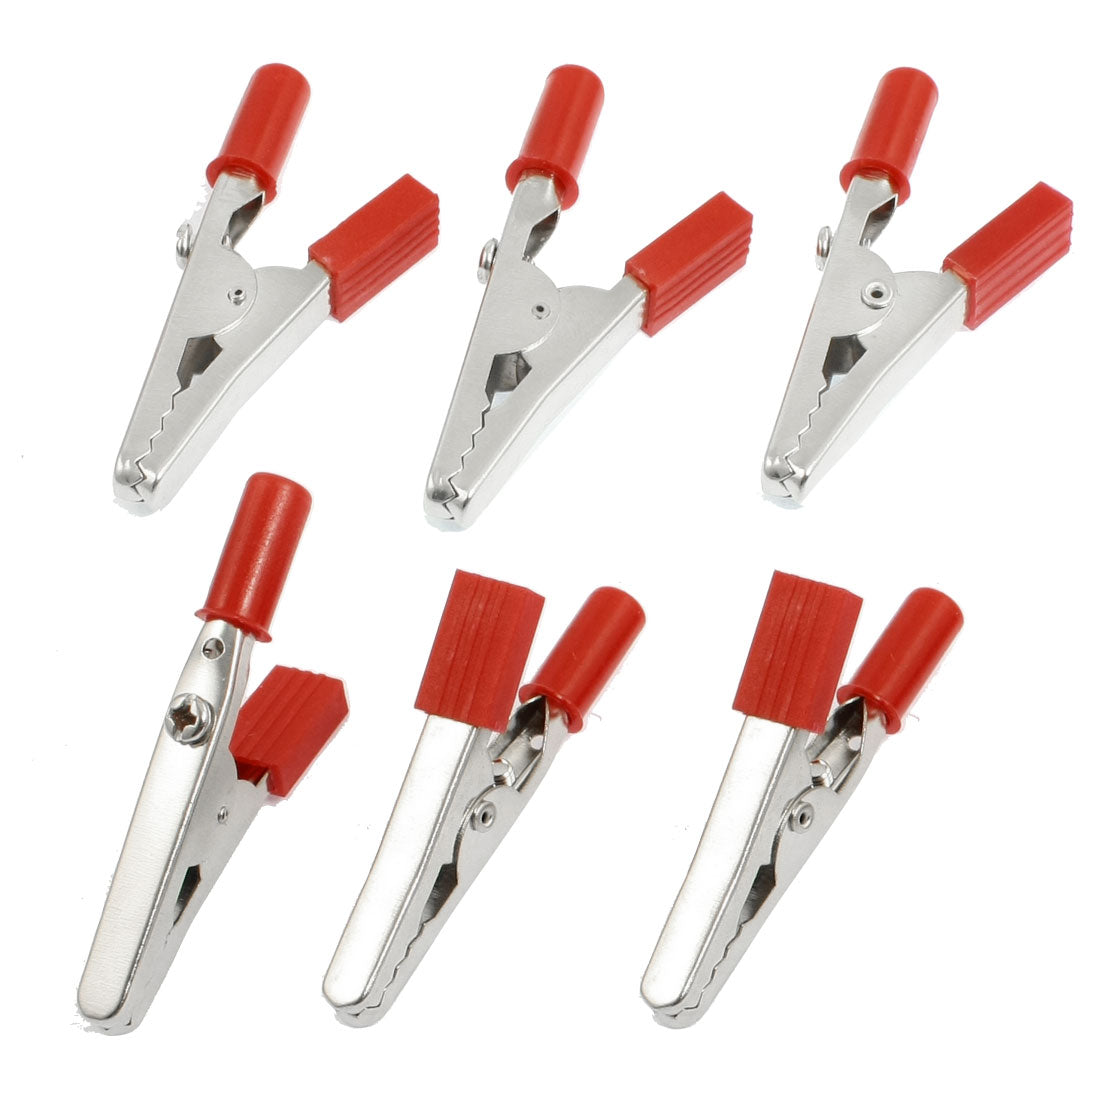 uxcell Uxcell 6 Pcs Red Plastic Coated Insulated Alligator Clips 2.2" for Charge Cable